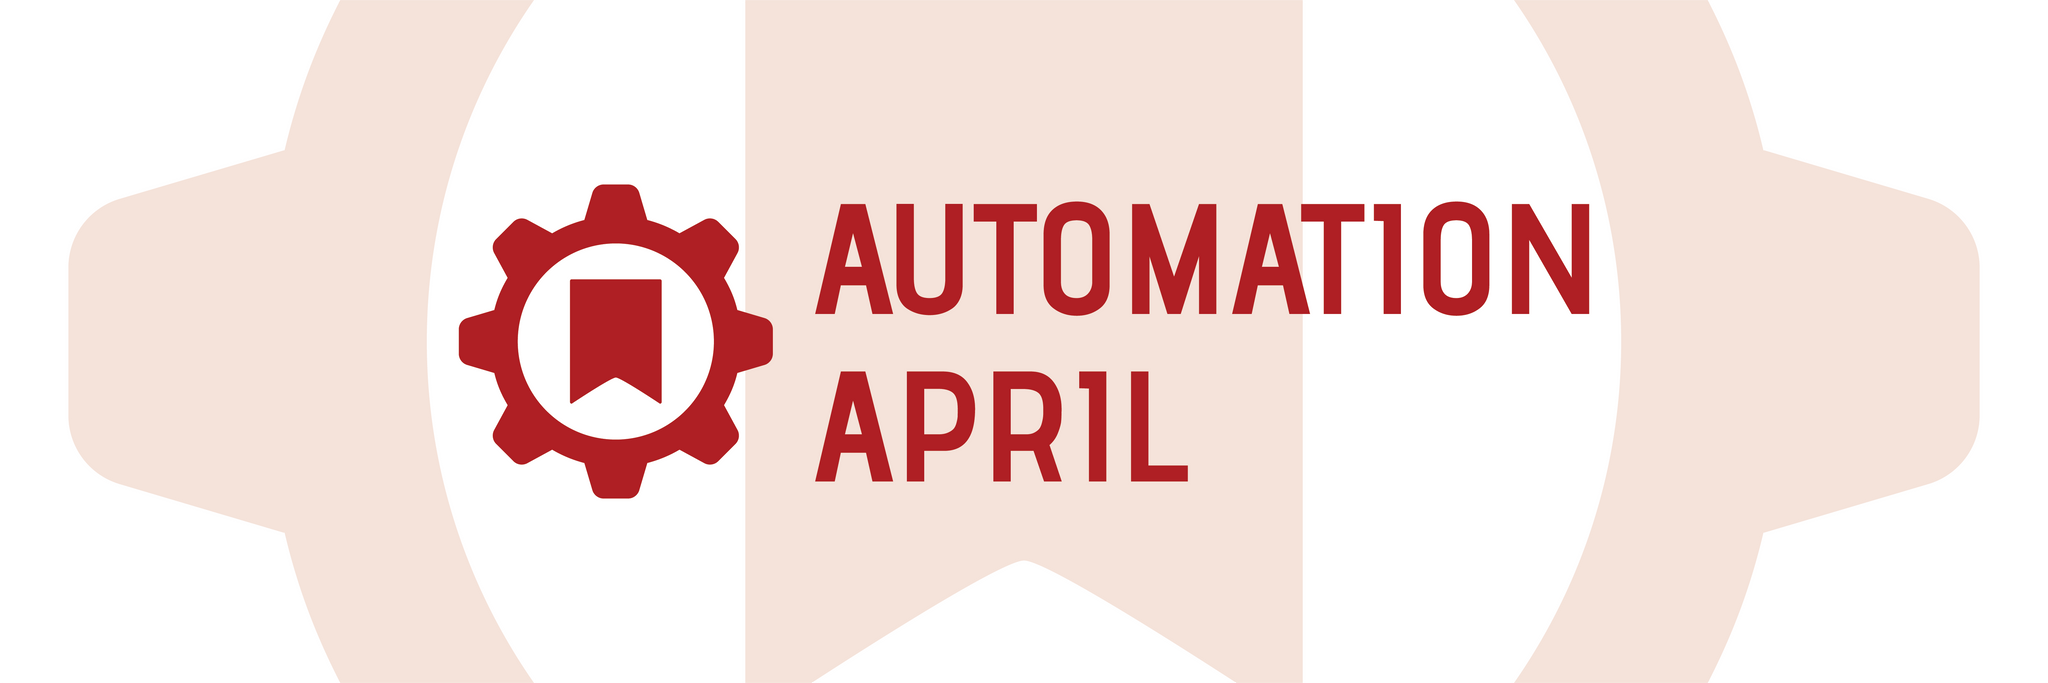 Welcome to Automation April.